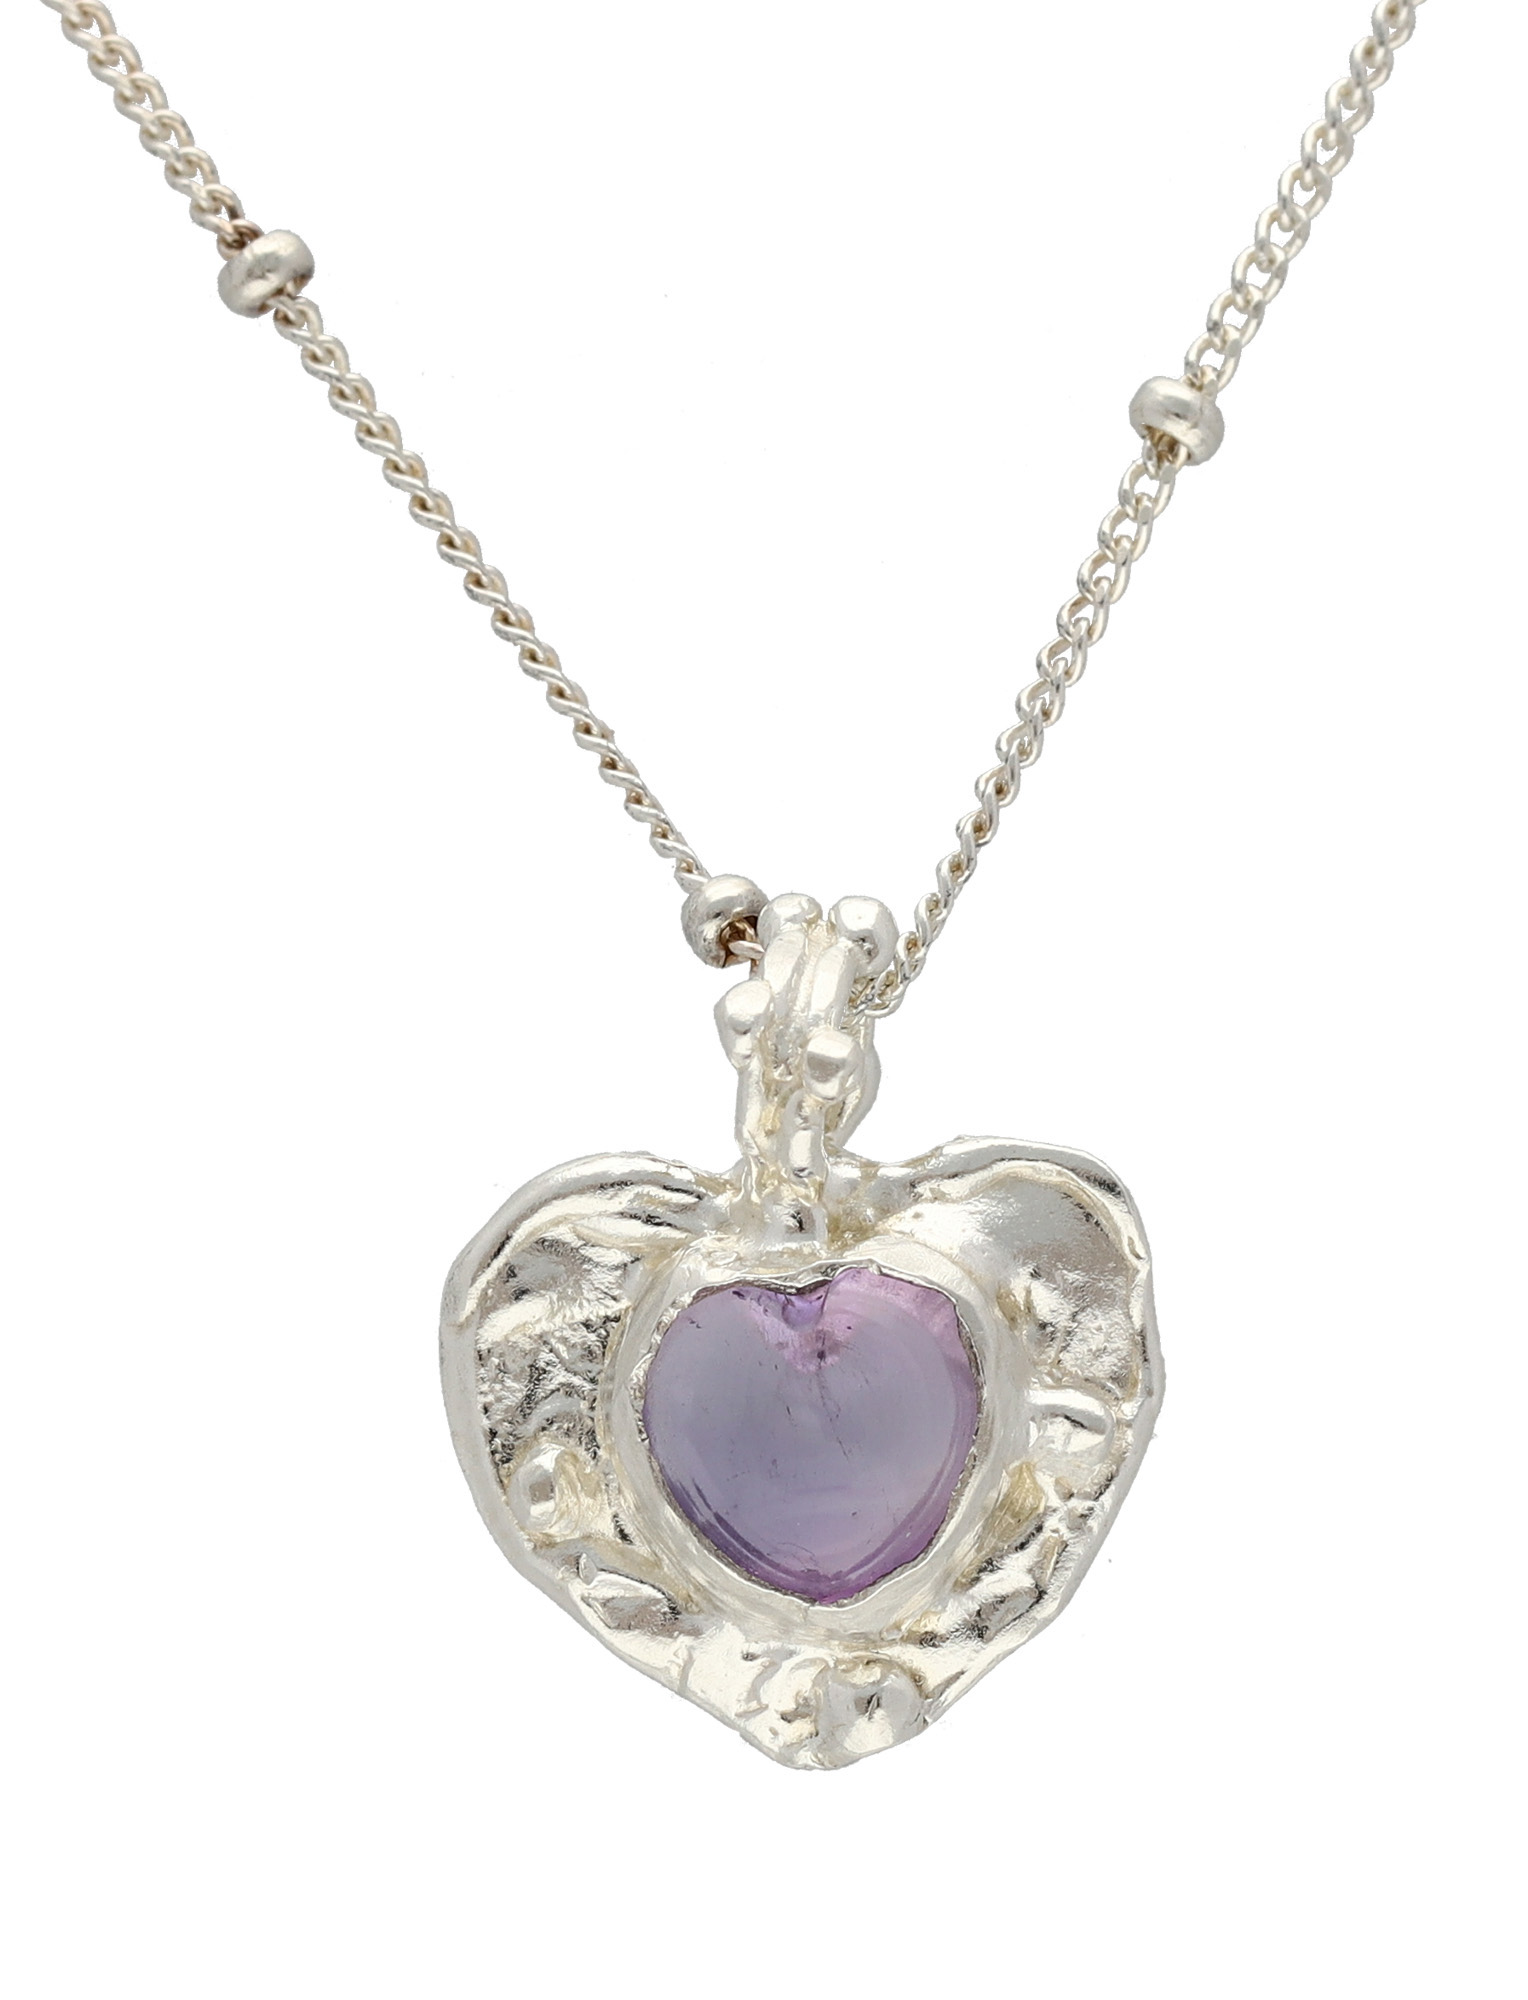 Follow Your Heart Necklace (Pink Amethyst)